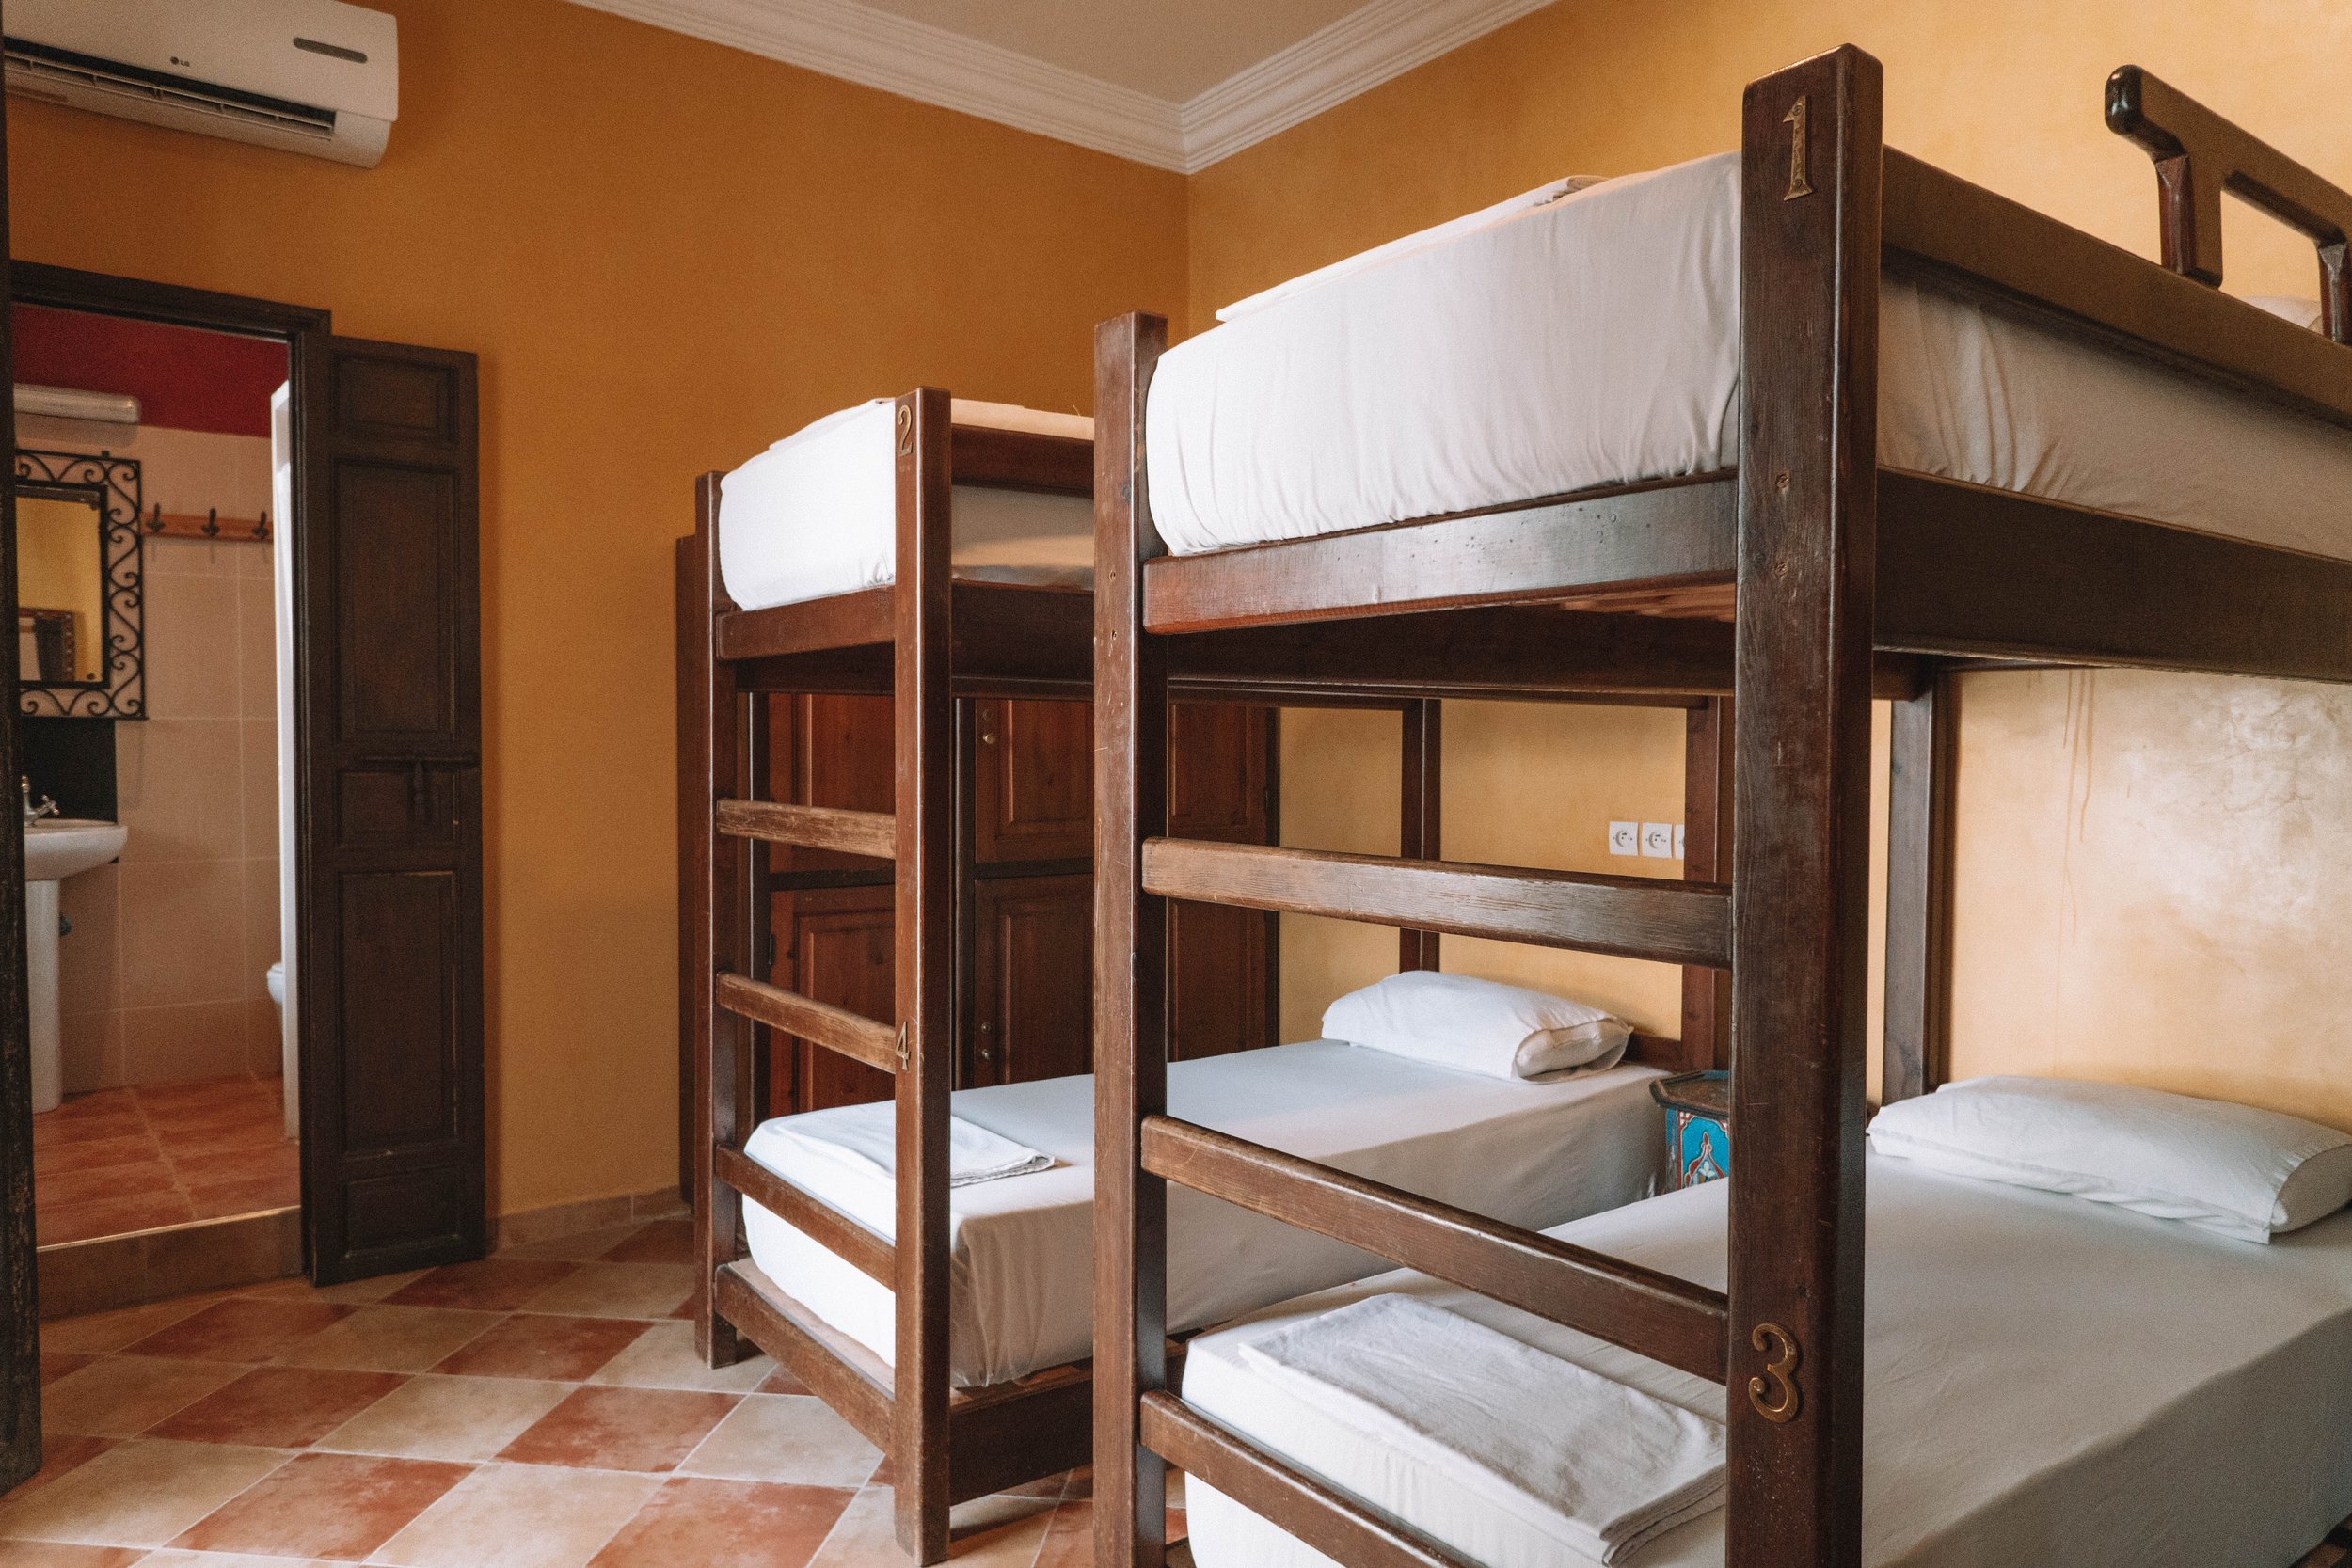 Equity Point Marrakech | Bed in 6-Bed Dormitory Room | 2.jpg